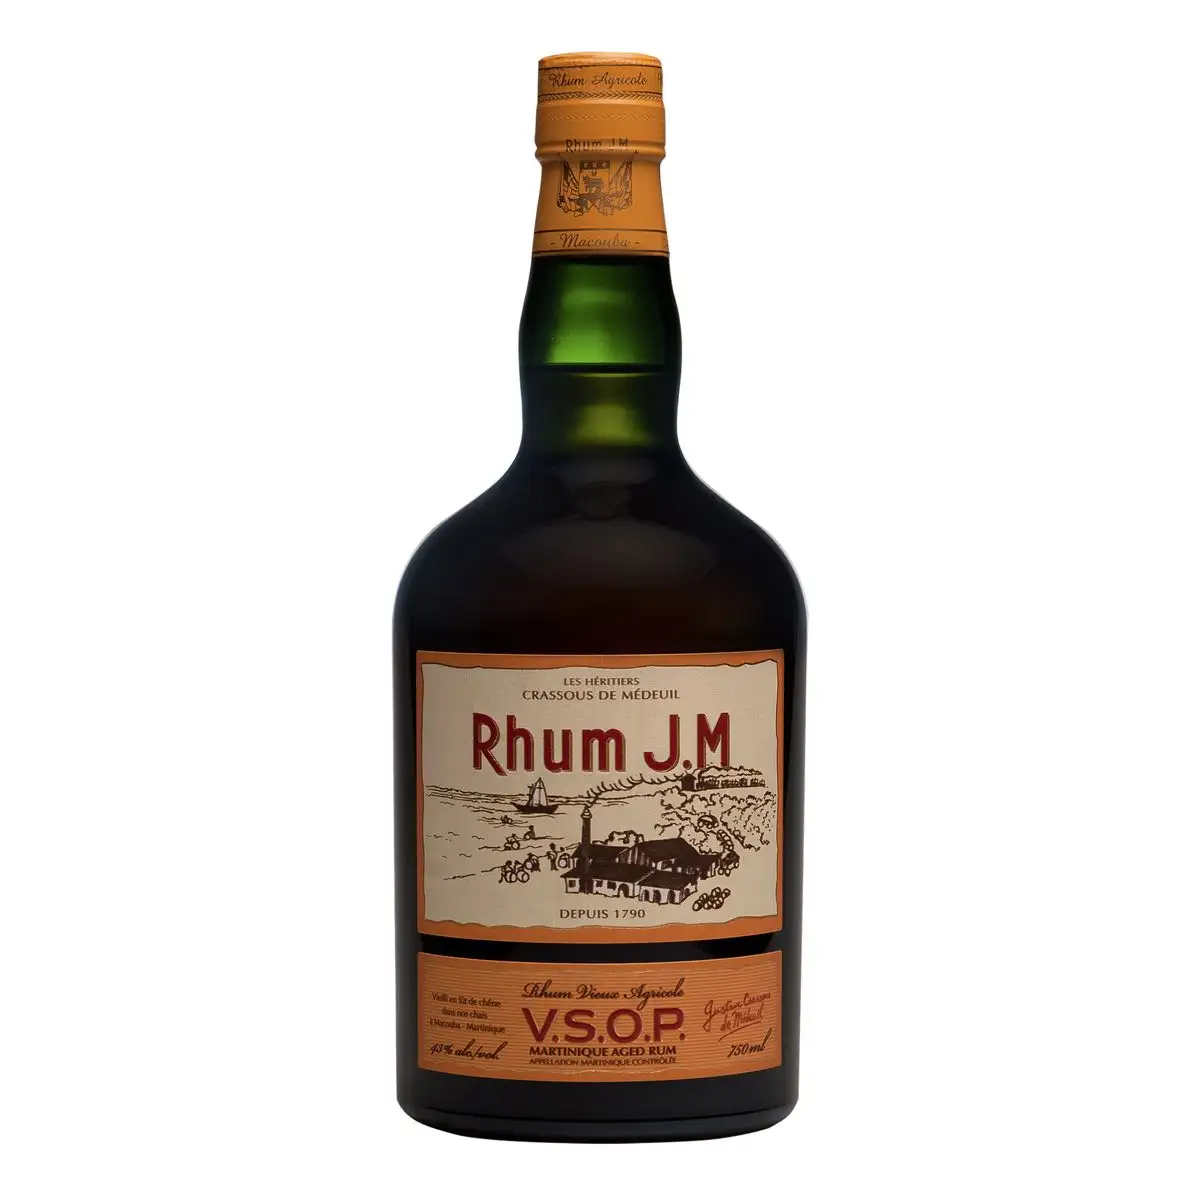 Image of the front of the bottle of the rum VSOP